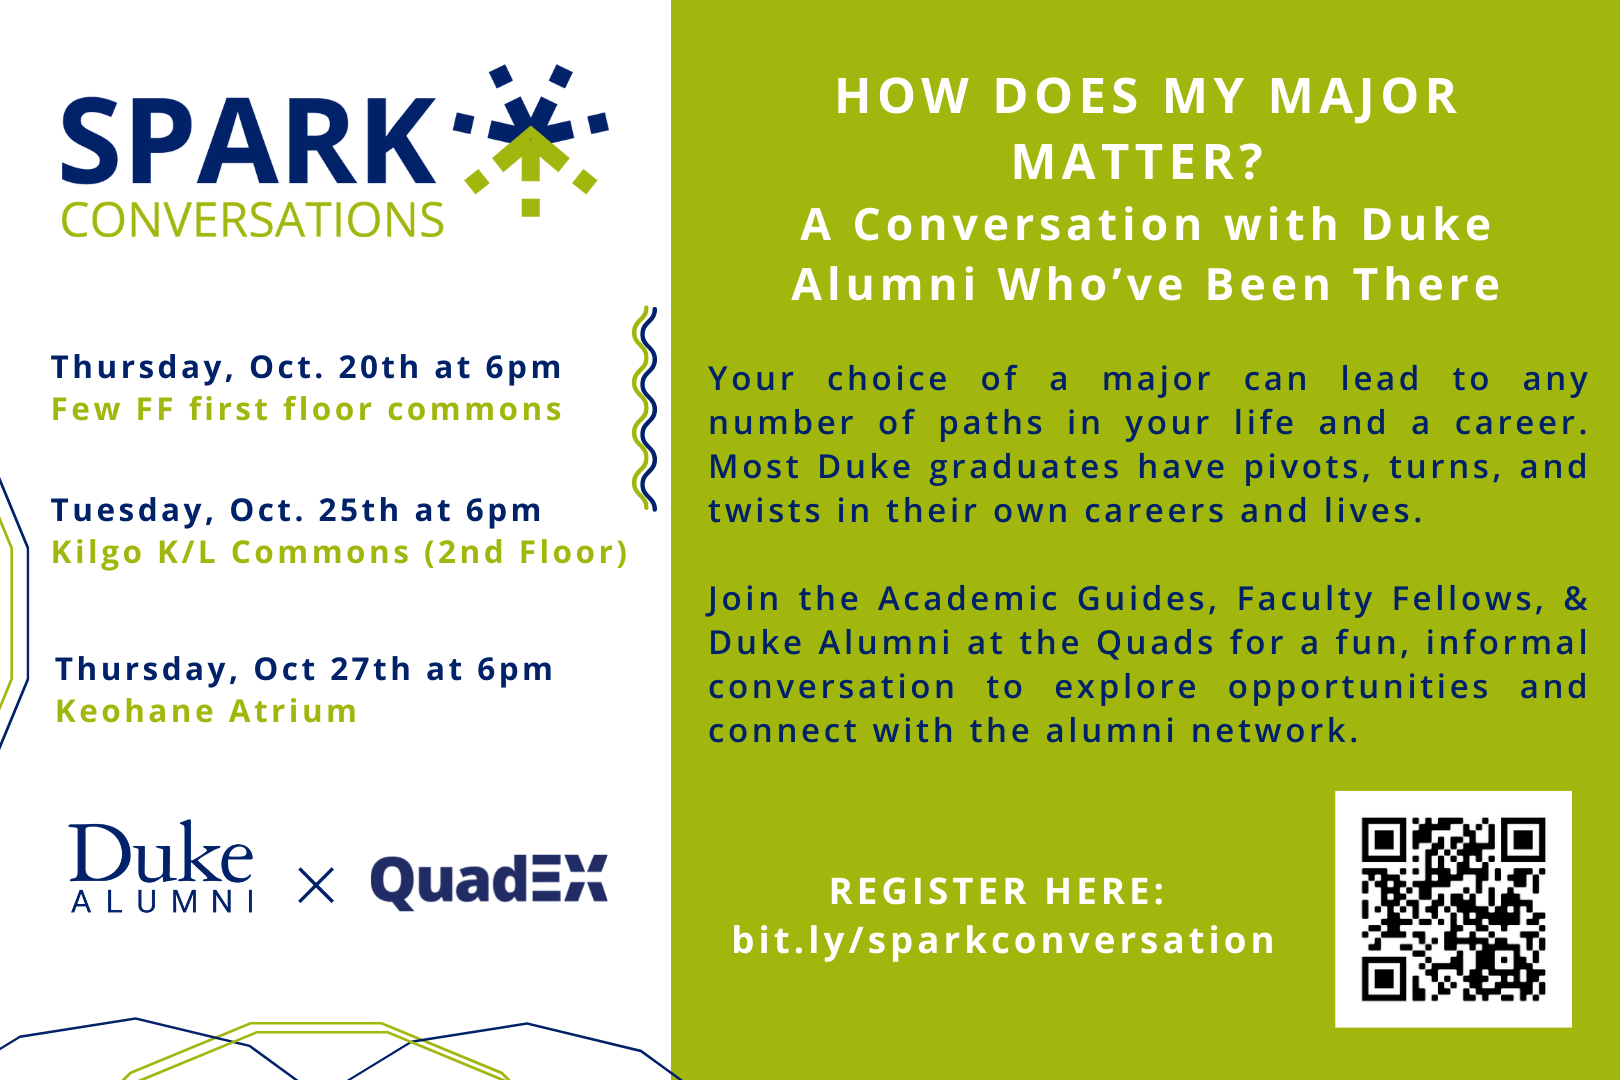 How Does My Major Matter?  A Conversation with Duke Alumni Who’ve Been There REGISTER HERE:  bit.ly/sparkconversation